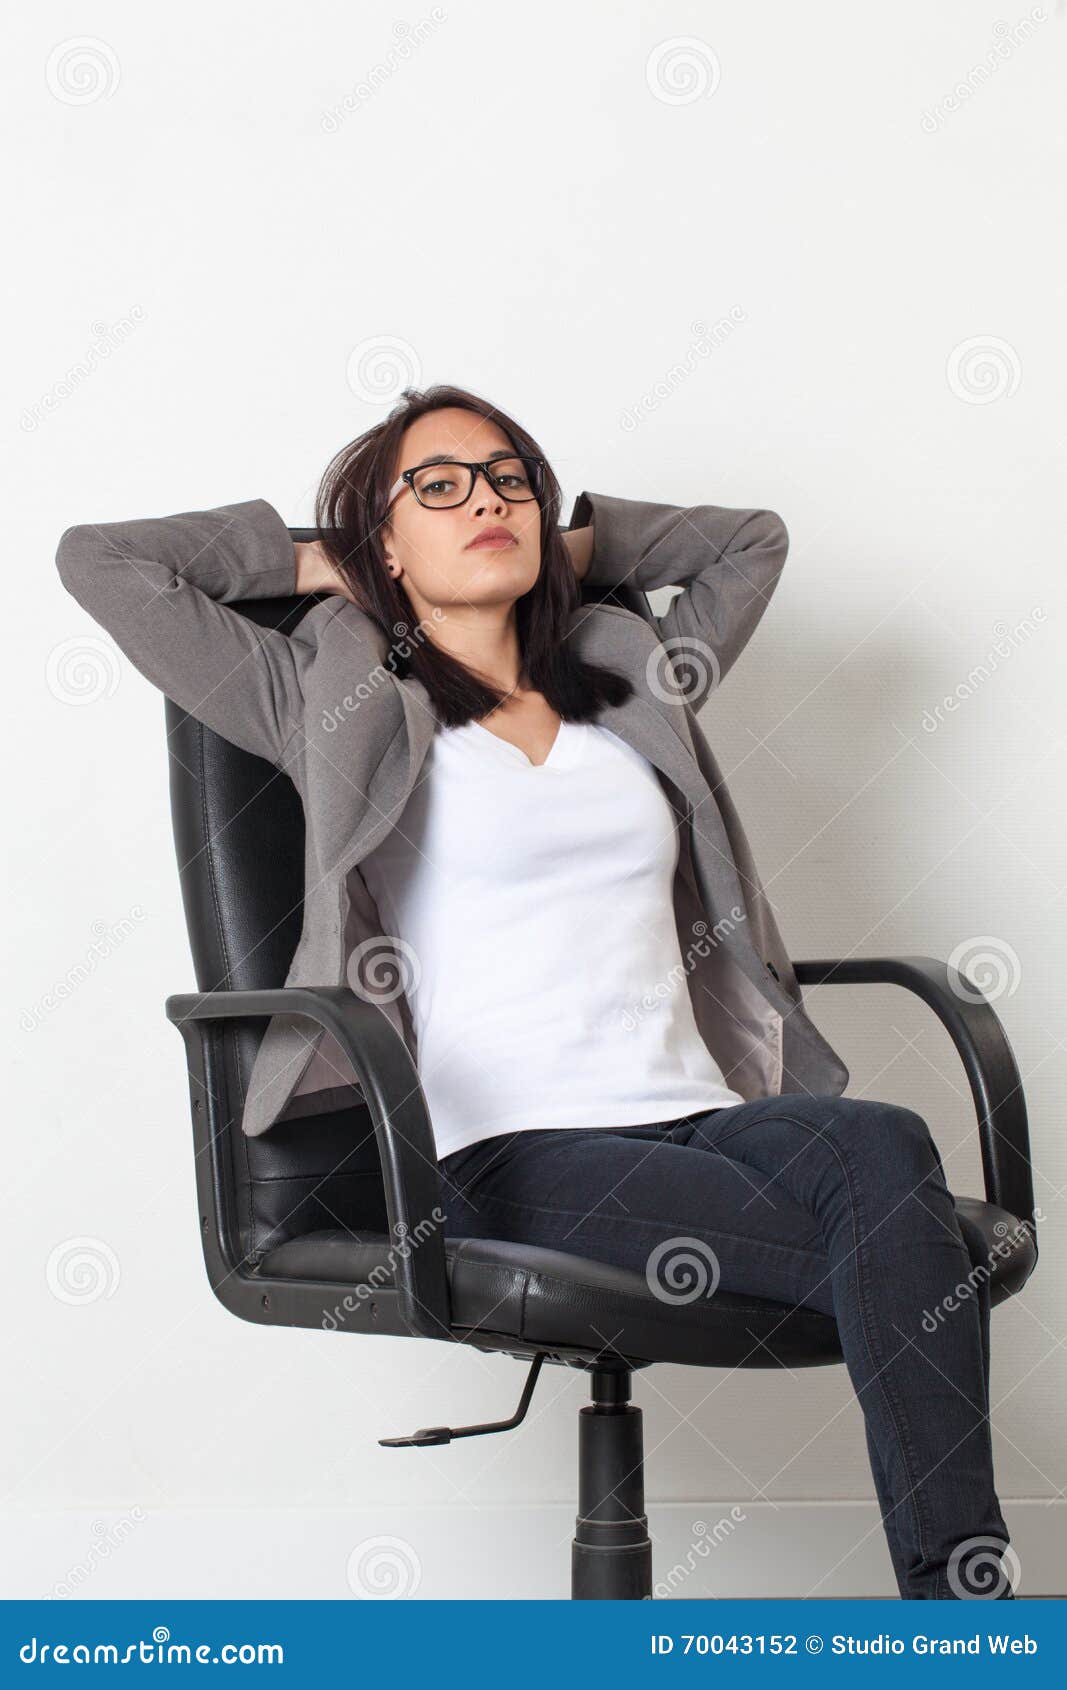 young corporate woman relaxing or expressing laziness